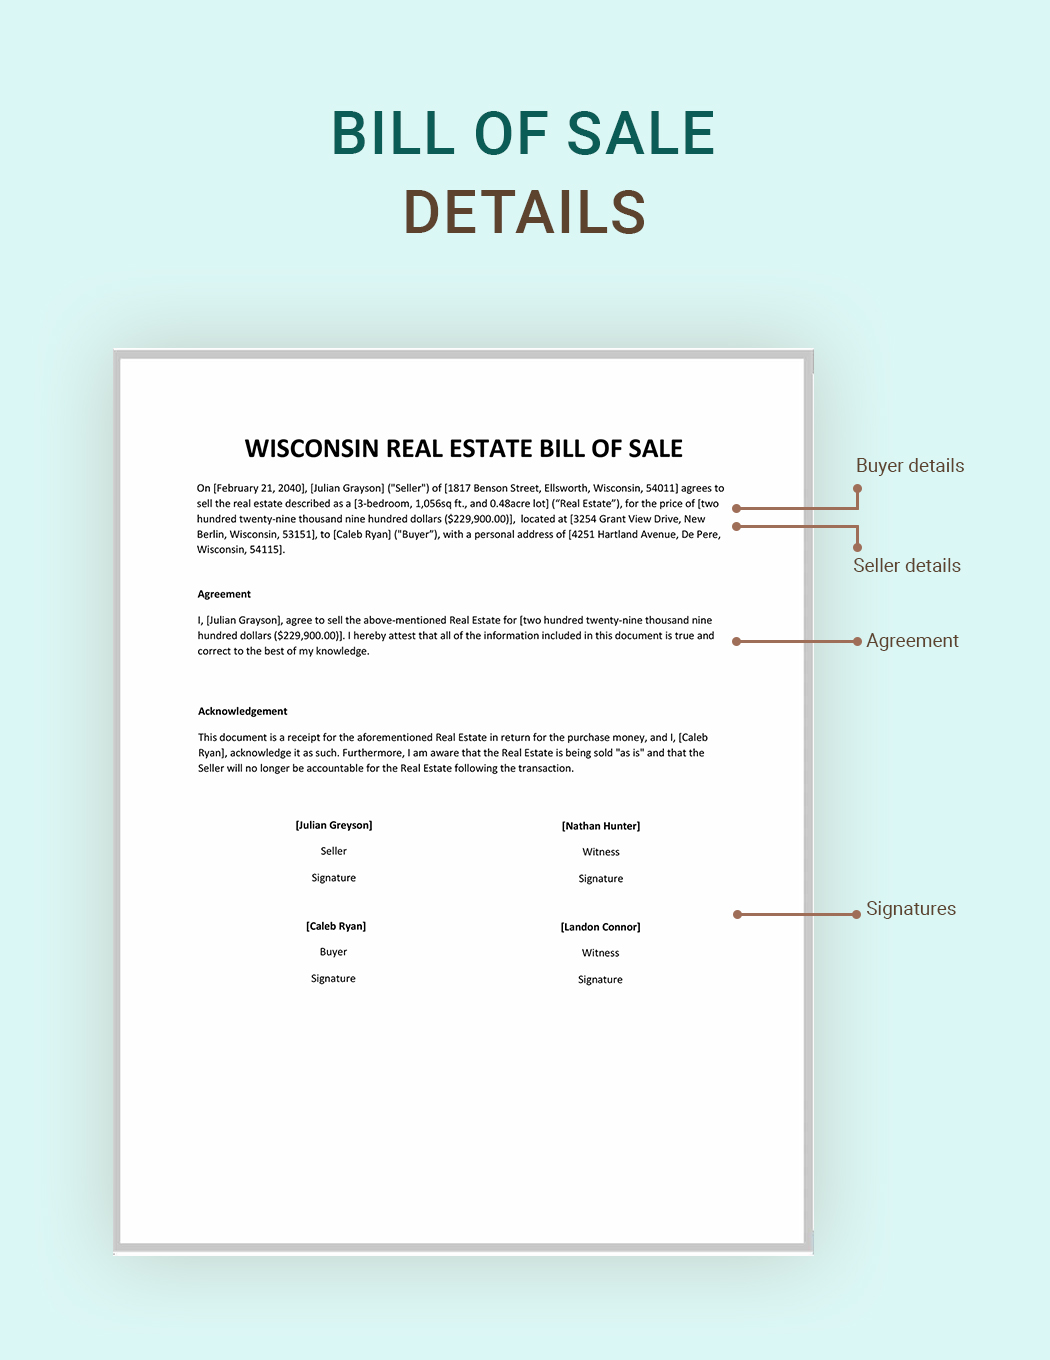 Wisconsin Real Estate Bill of Sale Template